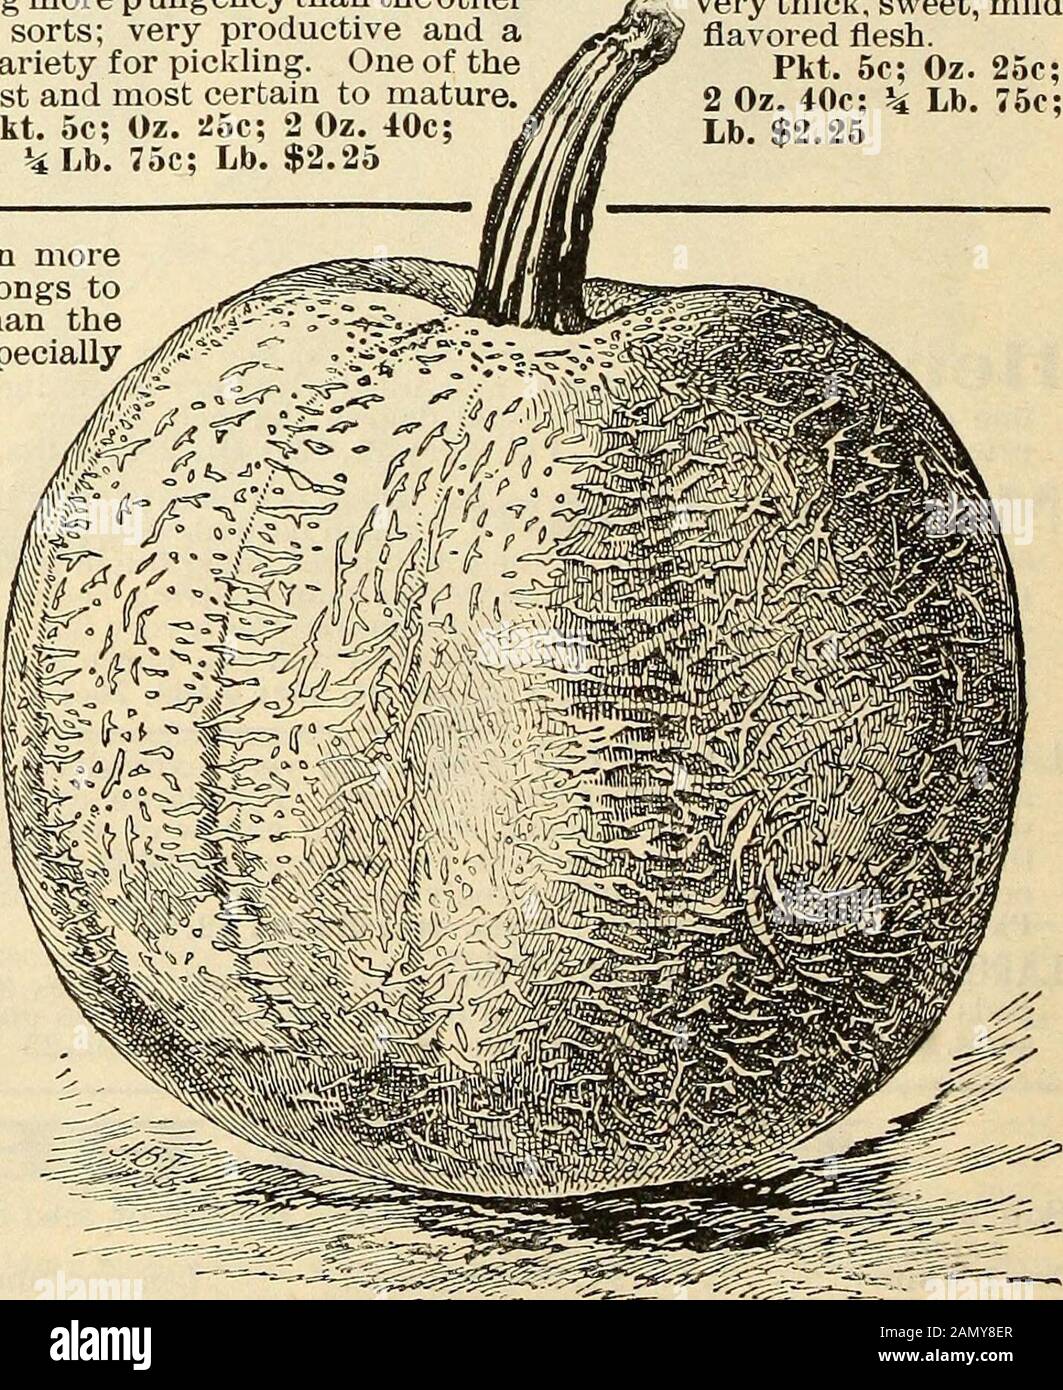 Seed annual, 1899 . peis irregular, some being round, and others elongated or flat-tened. It is of deep, rich, yellow color, fine grain and excellentflavor. Pkt. 5c; Oz. 10c; 2 0z.l0c; ^Lb.lSc; Lb.35c, postpaid.By freight or express, at purchasers expense^ $12.00 per 100 lbs. Sweet Cheese, or KentwcKy TieW ^eJy^inTe^sS: Fruit flattened, the diameter being two or three times morethan the length; skin mottled light green and yellow, chang-ing to rich cream color as it matures; flesh tender and of excel-lent quality. Pkt. 5c; Oz. 10c; 2 Oz. 15c; ^ Lb. 20c; Lb. 50c We consider this a true Pumpkinr Stock Photo